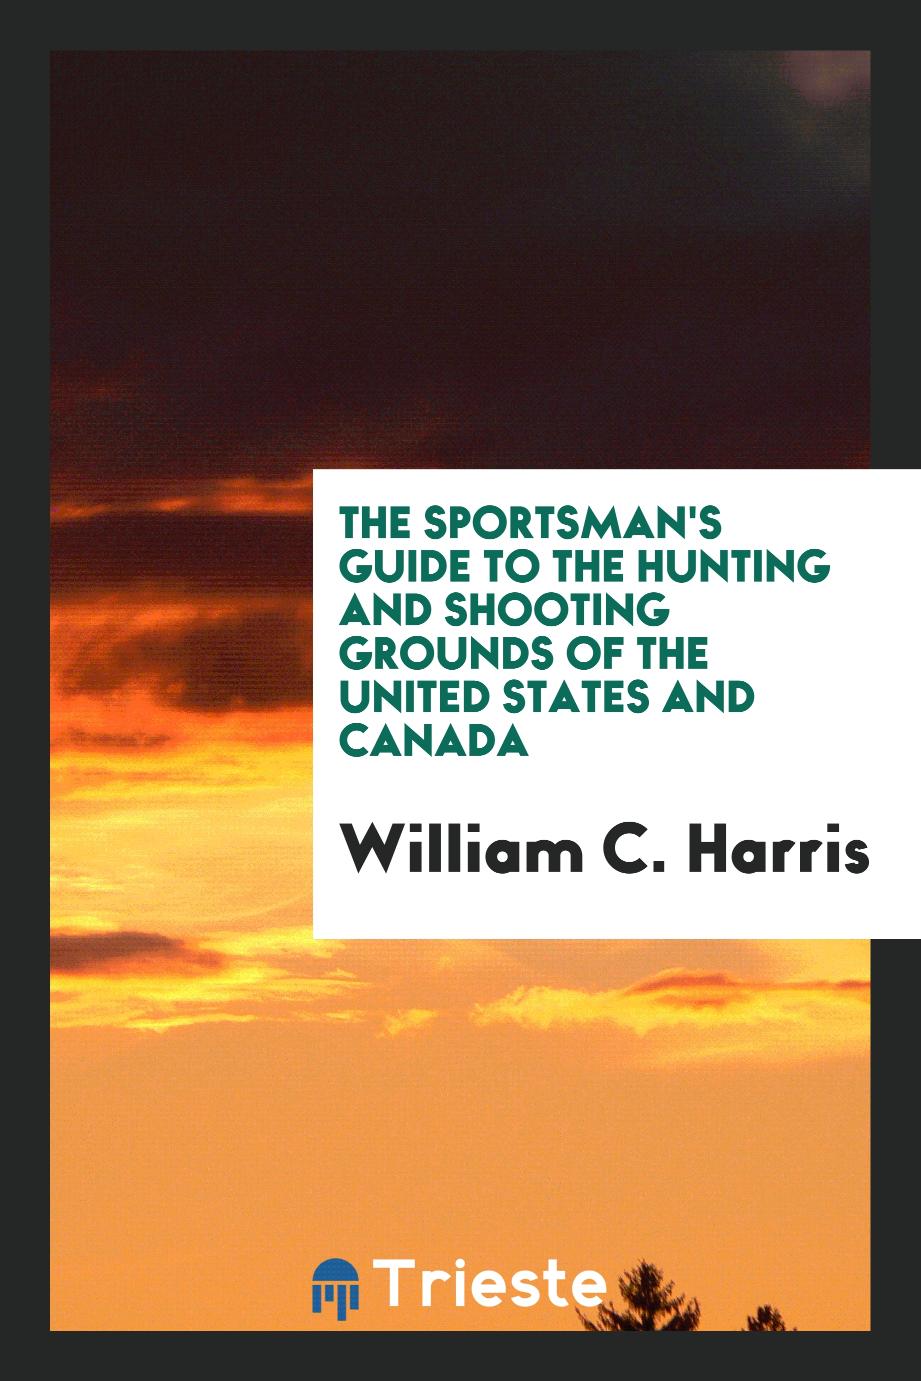 The sportsman's guide to the hunting and shooting grounds of the United States and Canada